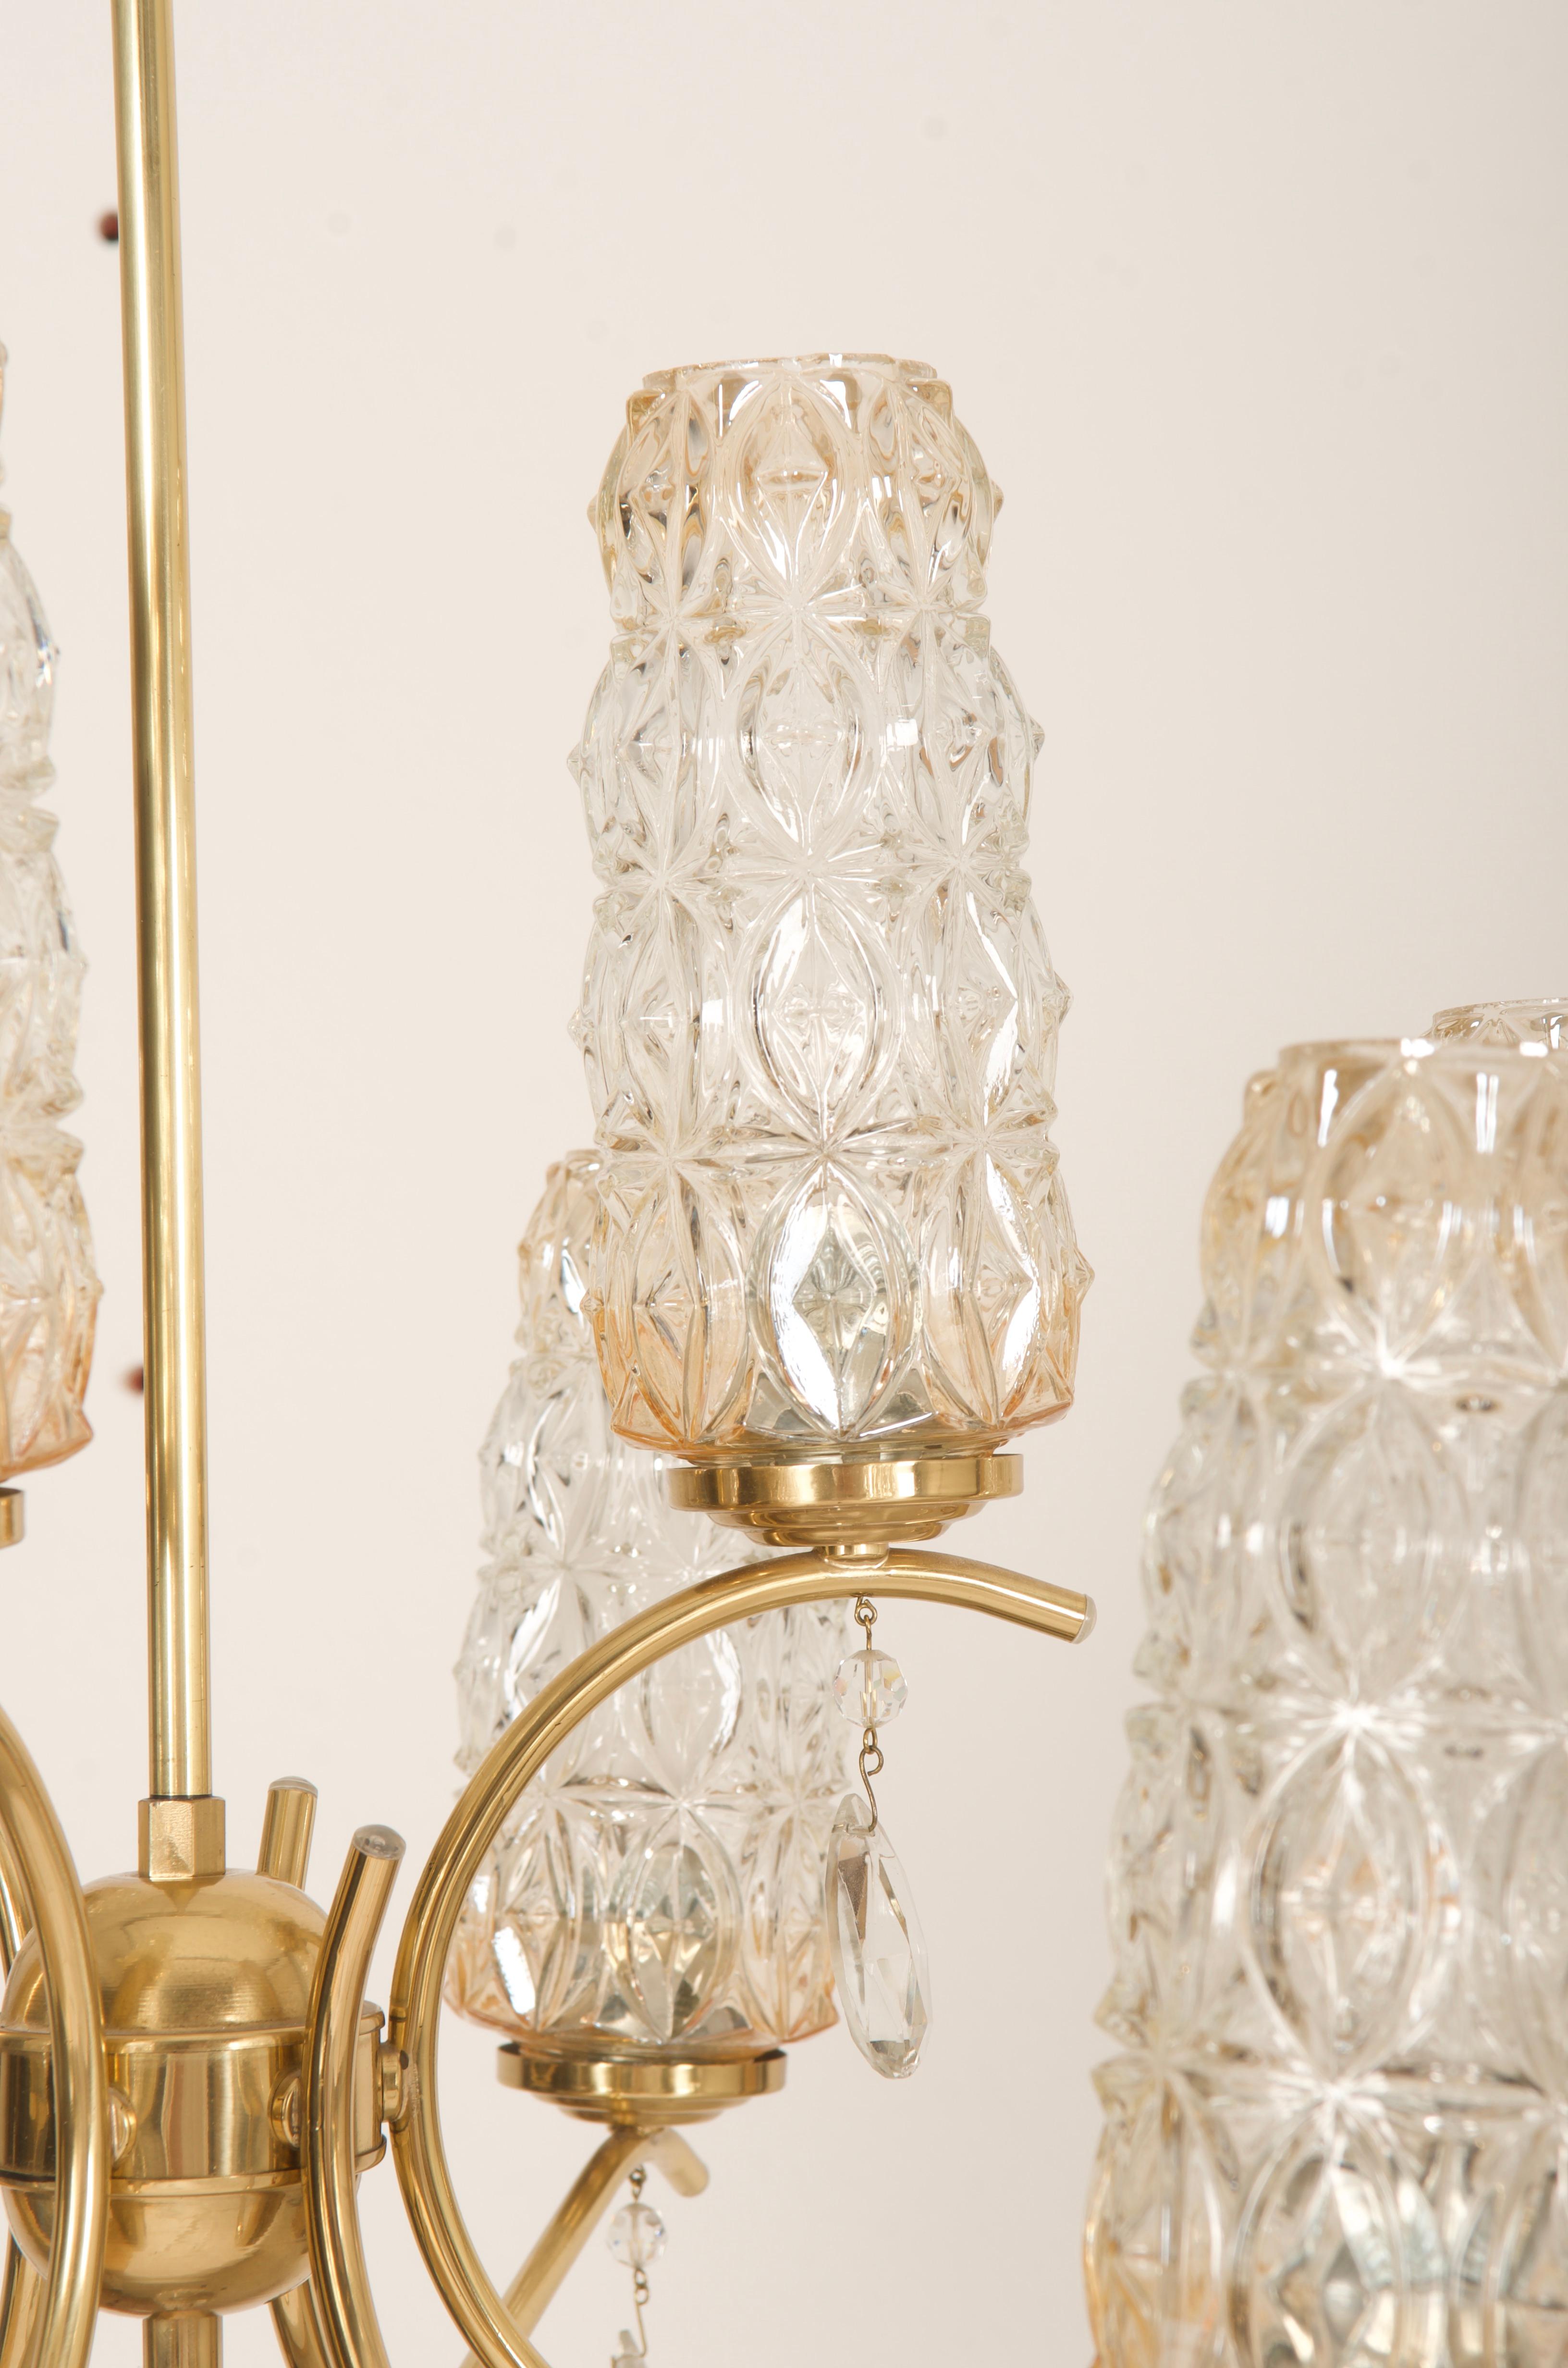 Mid-20th Century Huge Midcentury Brass Glass Chandelier For Sale